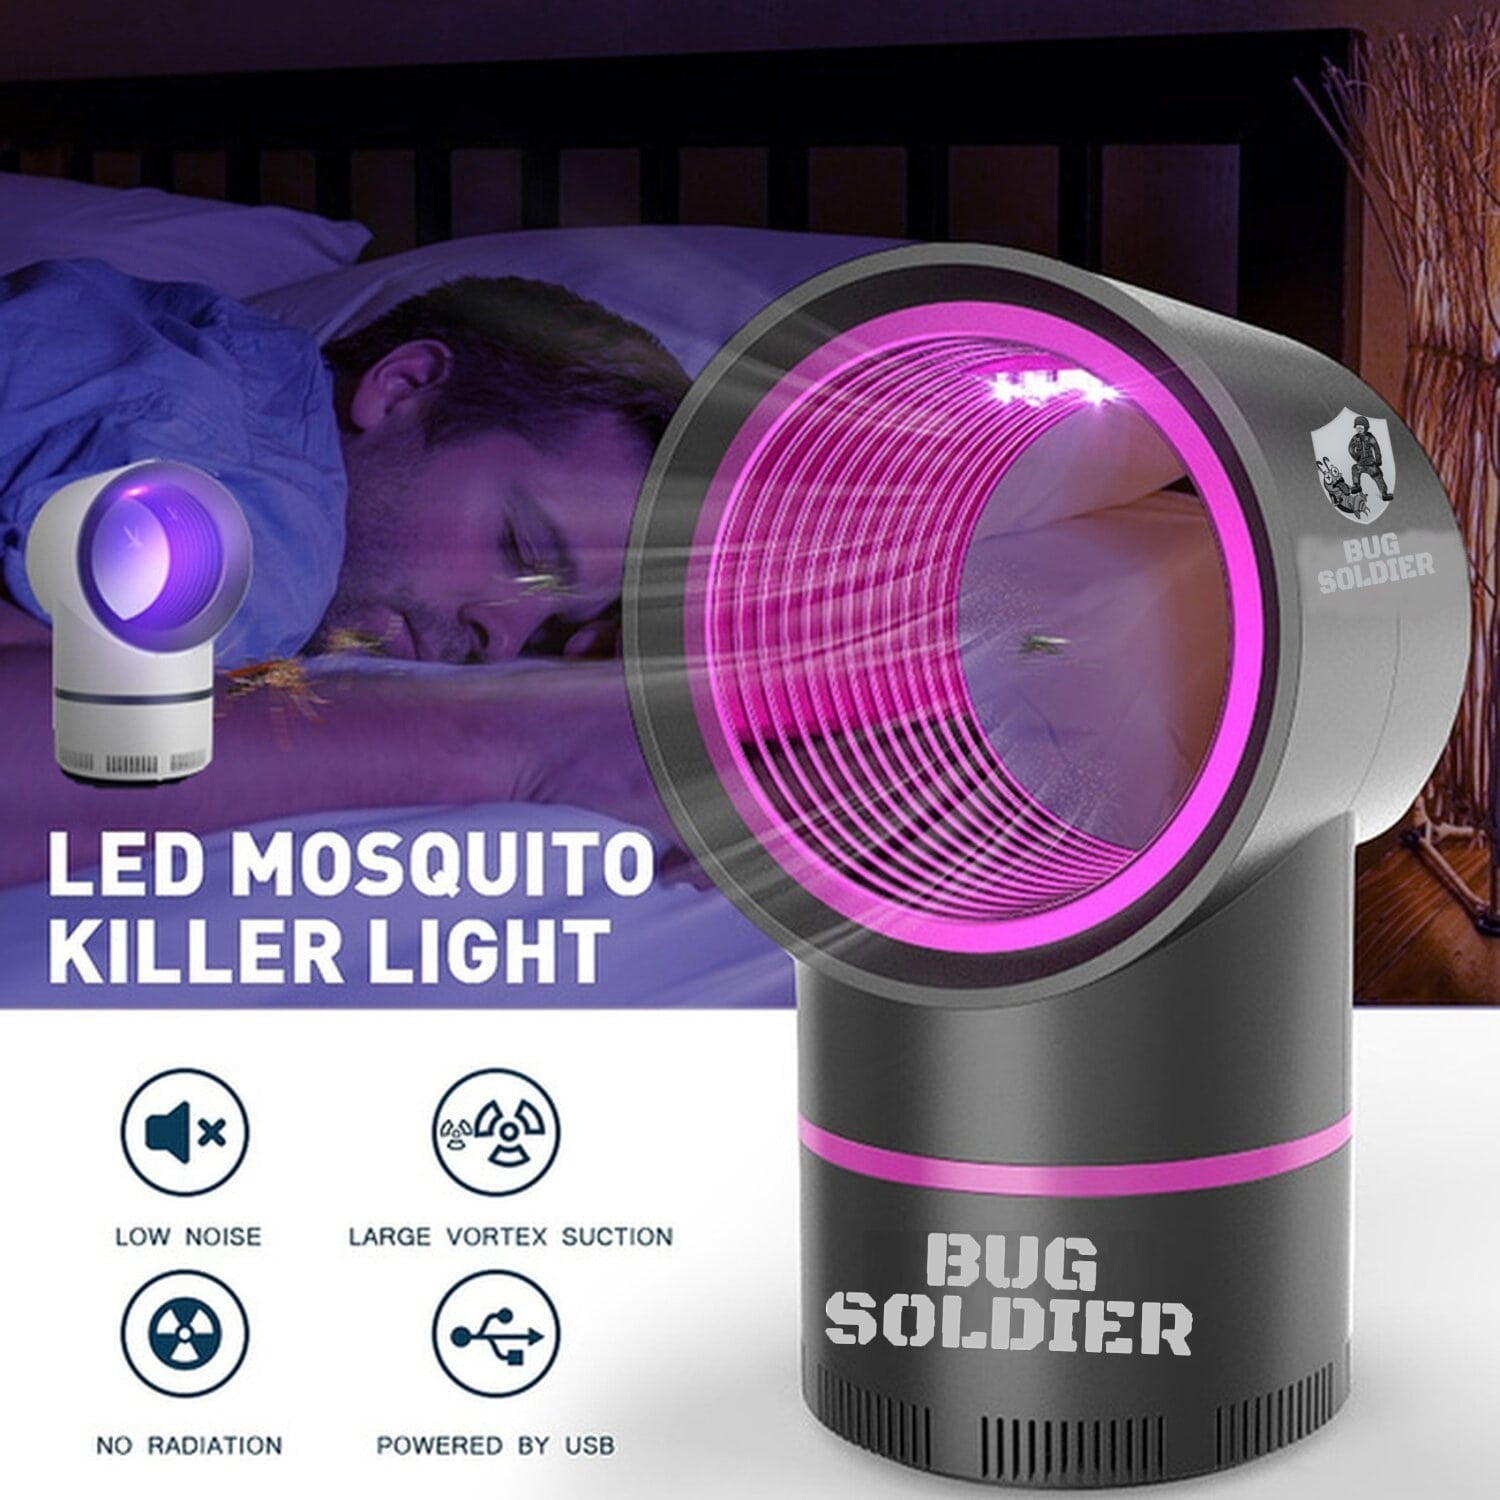 LED Mosquito Killer Lamp USB Electronic Mosquito Repellent Killing Light Mosquito Trapper Fly Killer for Home Office Indoor Outdoor Purple No Radiation 